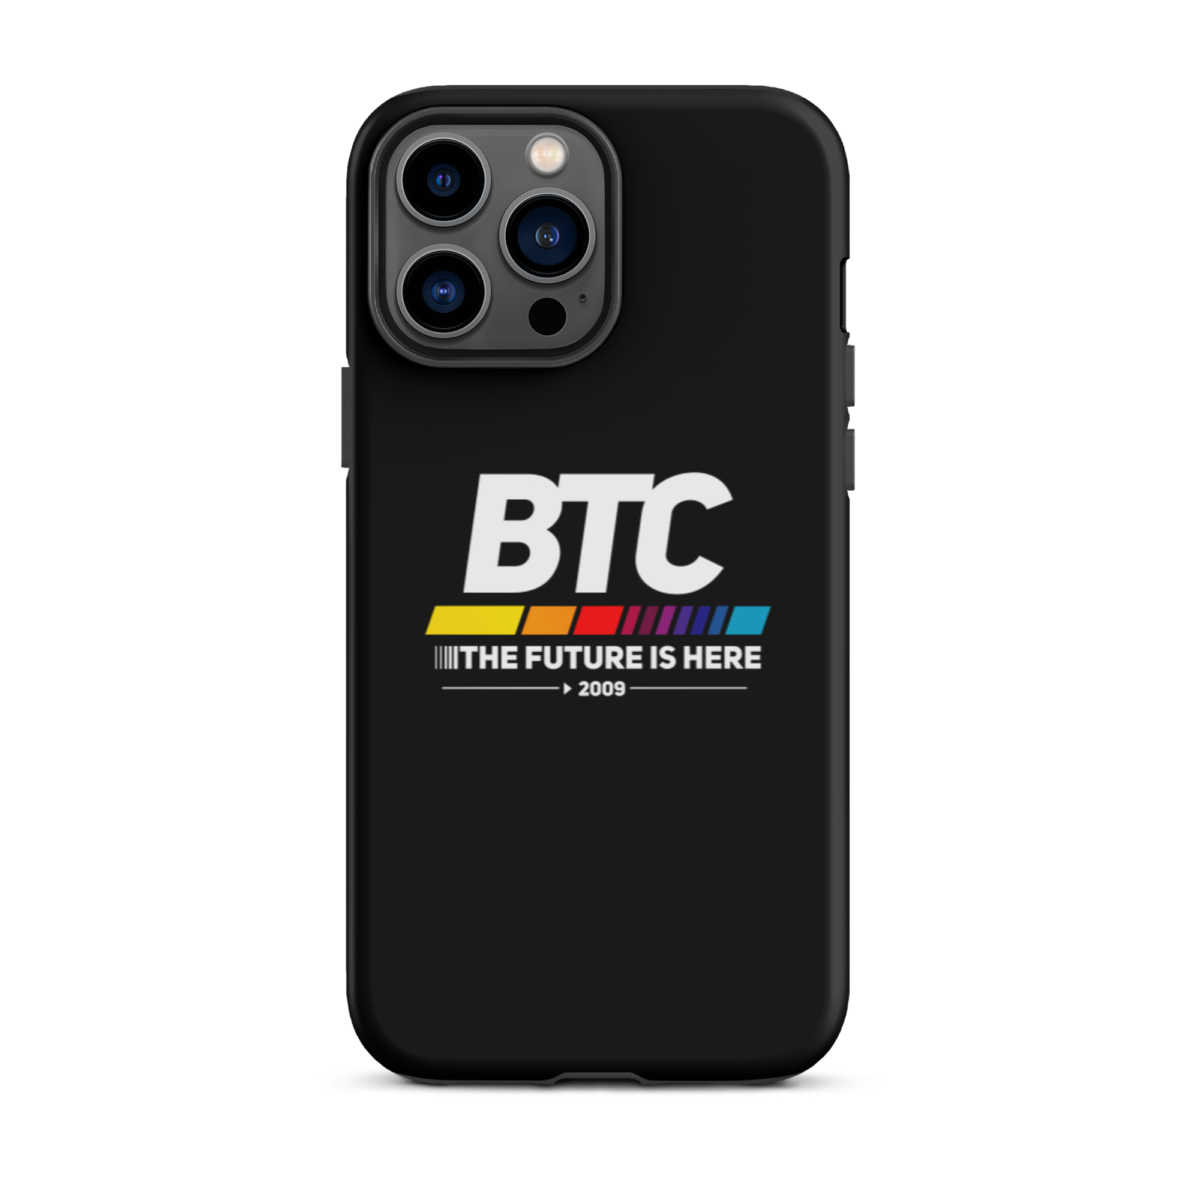 tough iphone case glossy iphone 13 pro max front 6345d56a3138e - BTC: The Future Is Here Tough iPhone Case